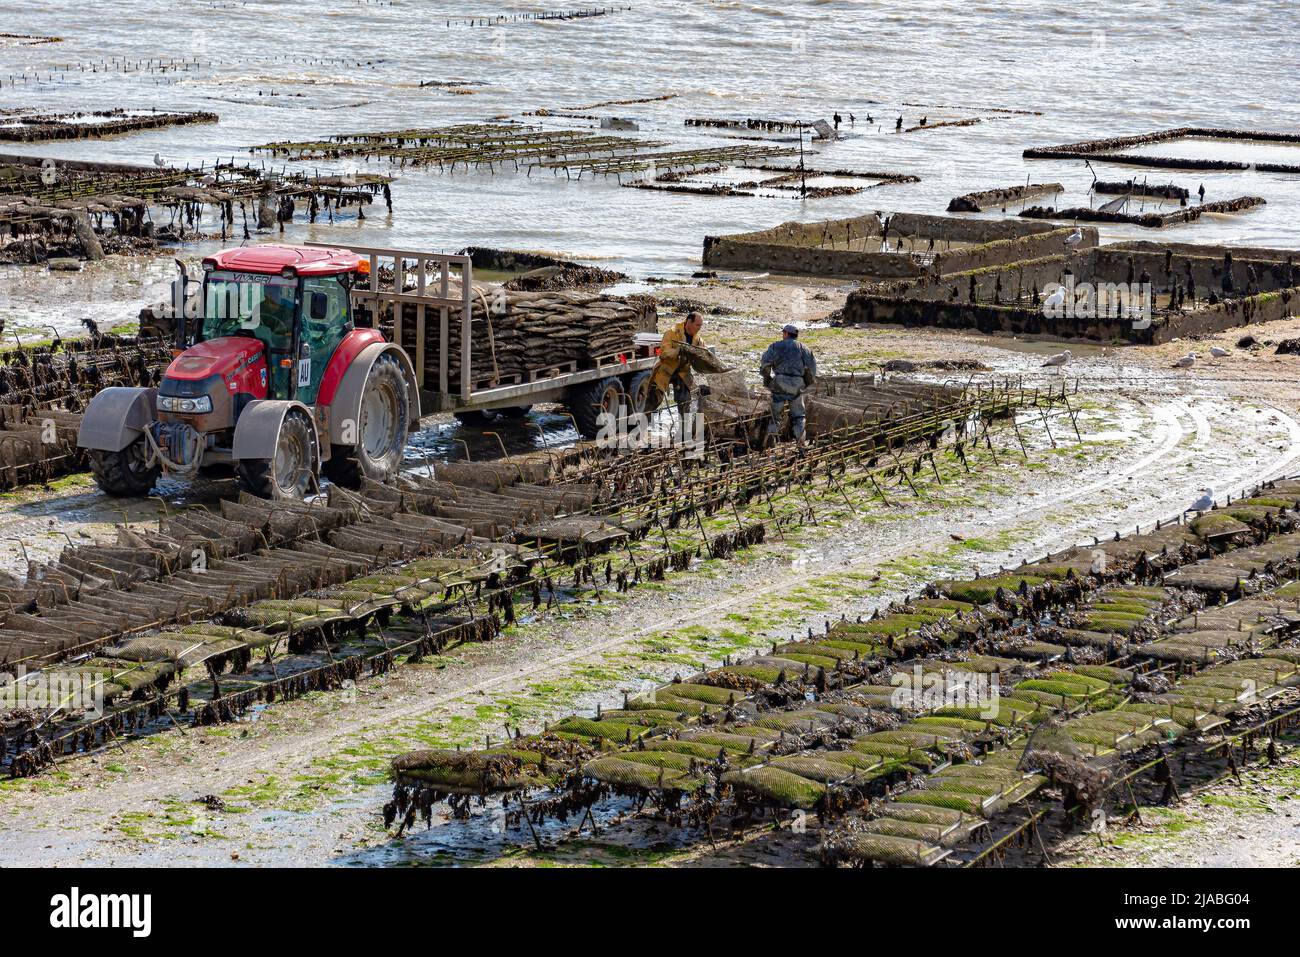 Concale, France – April 11, 2022: Oyster farmers are transporting bags full of oysters onto their amphibious vehicles. Stock Photo